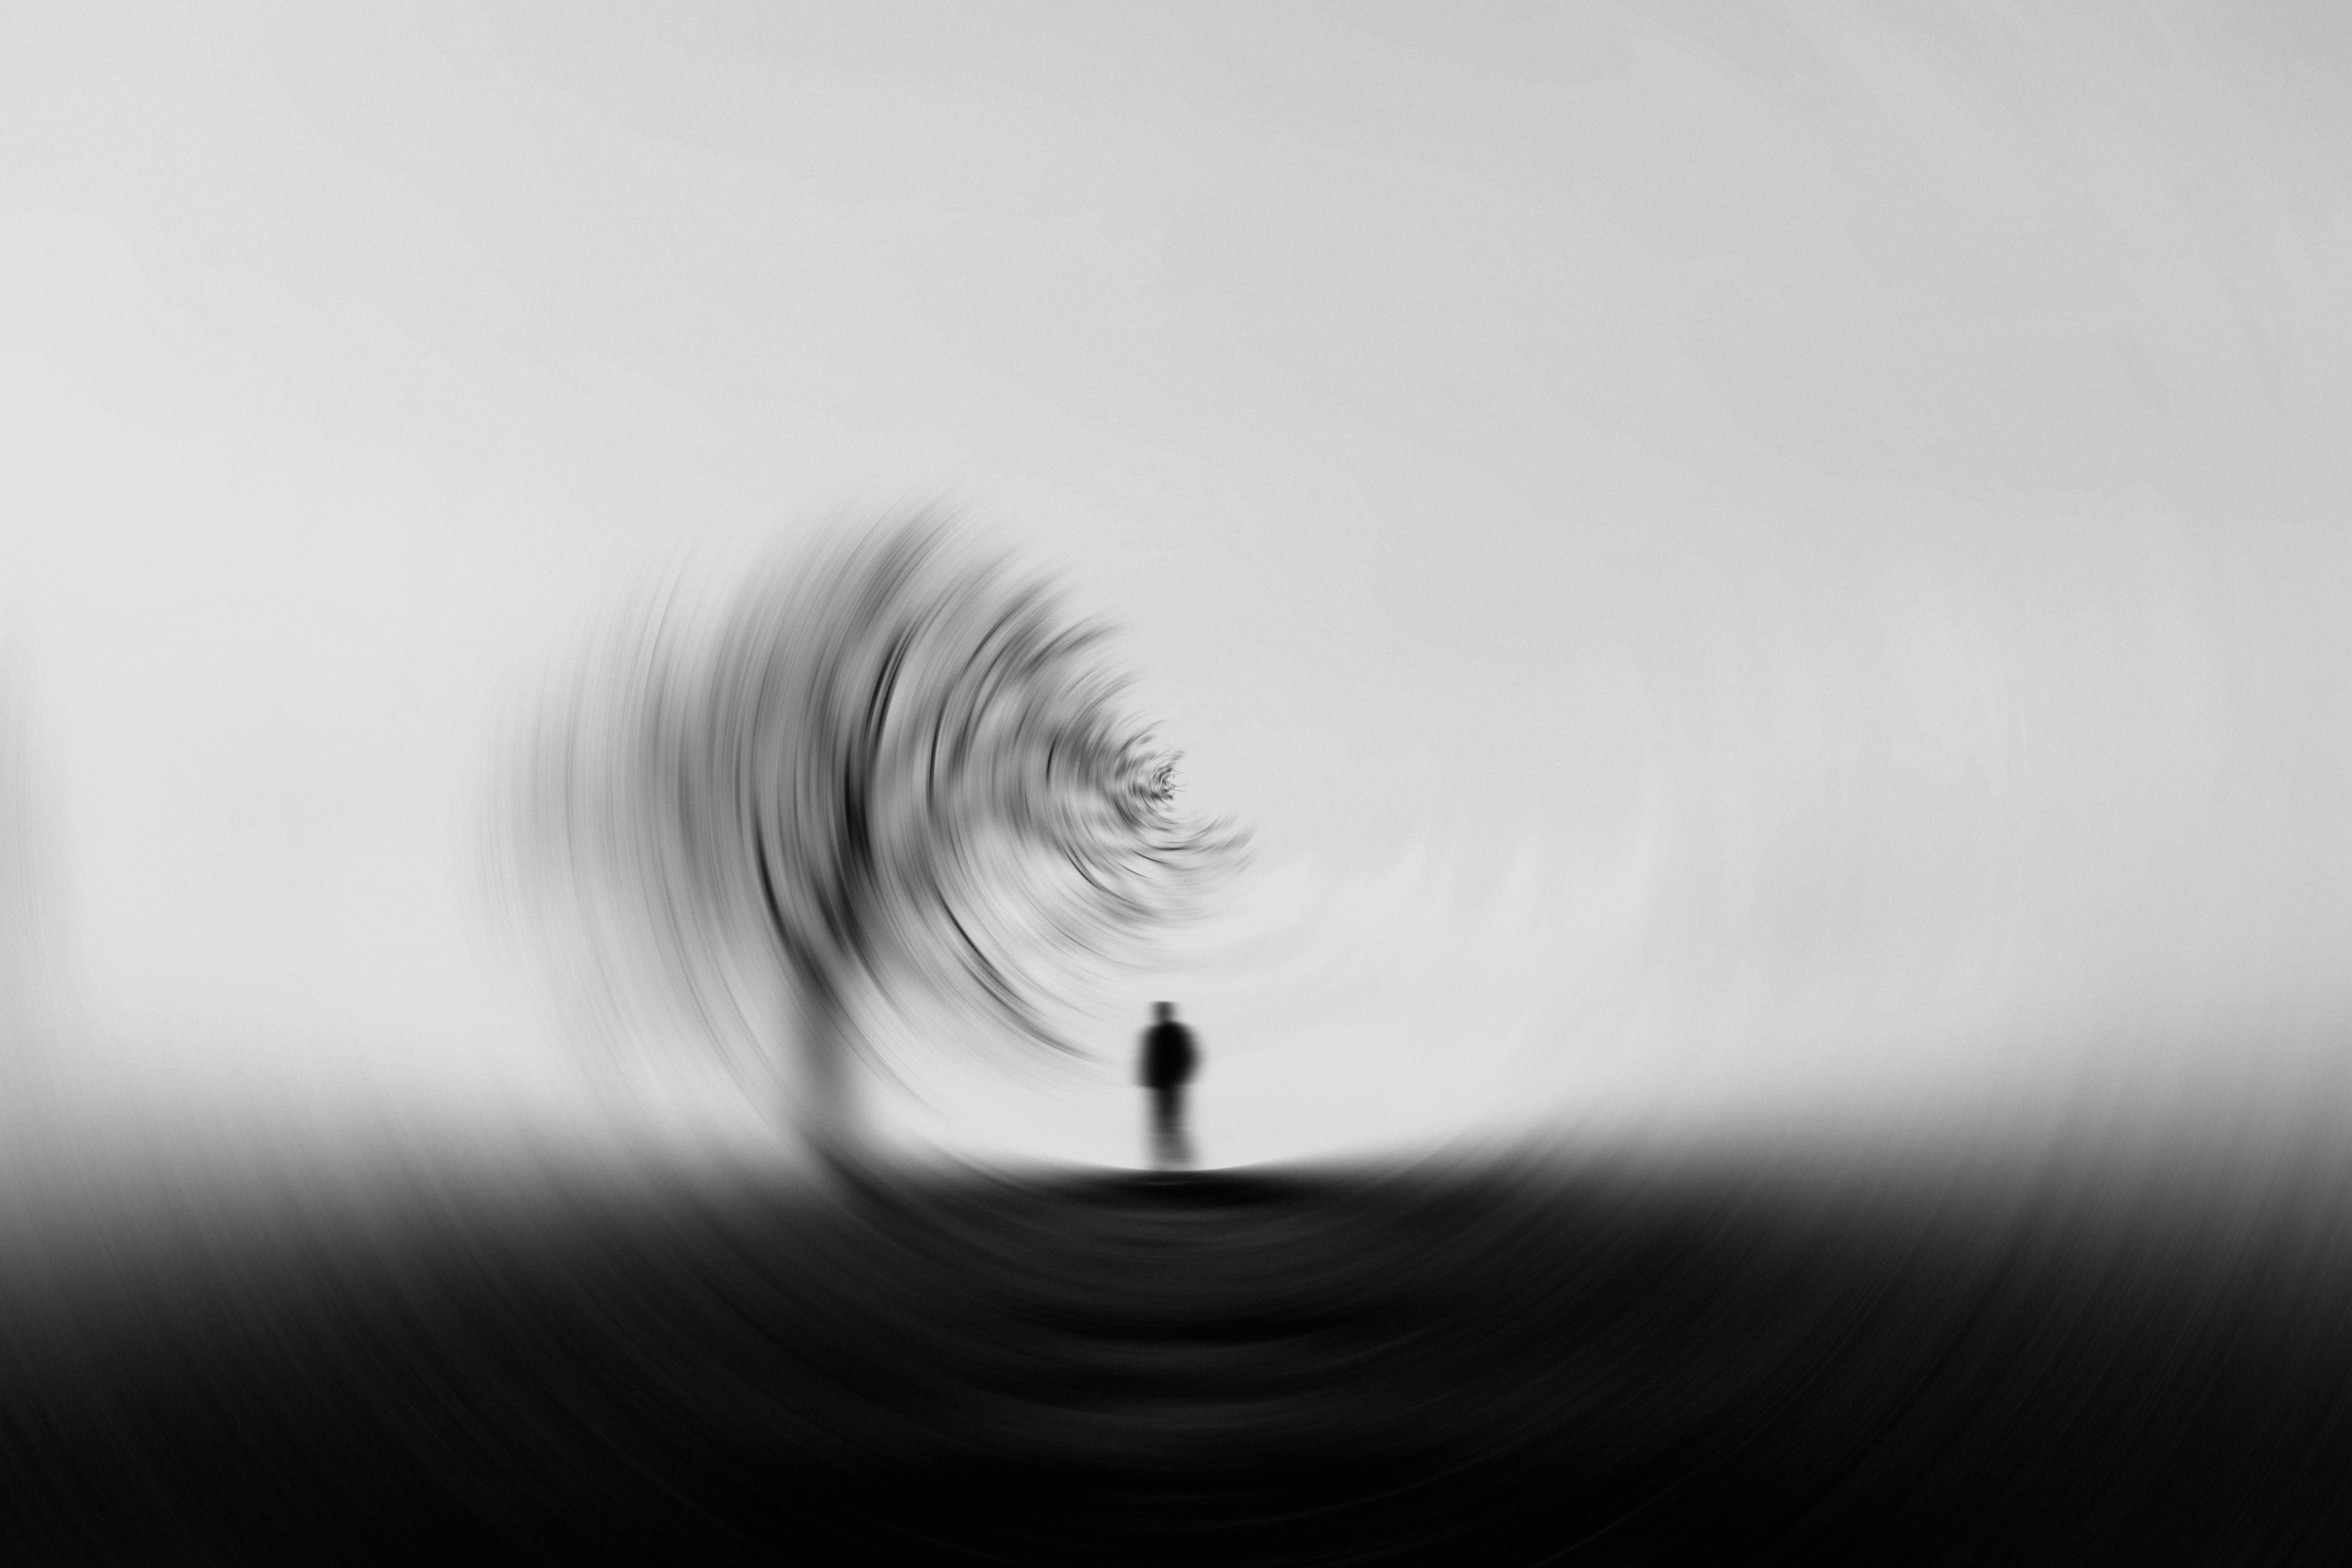 bw, silhouette, chb, smooth, blur, miscellanea, miscellaneous, wood, tree, effect images